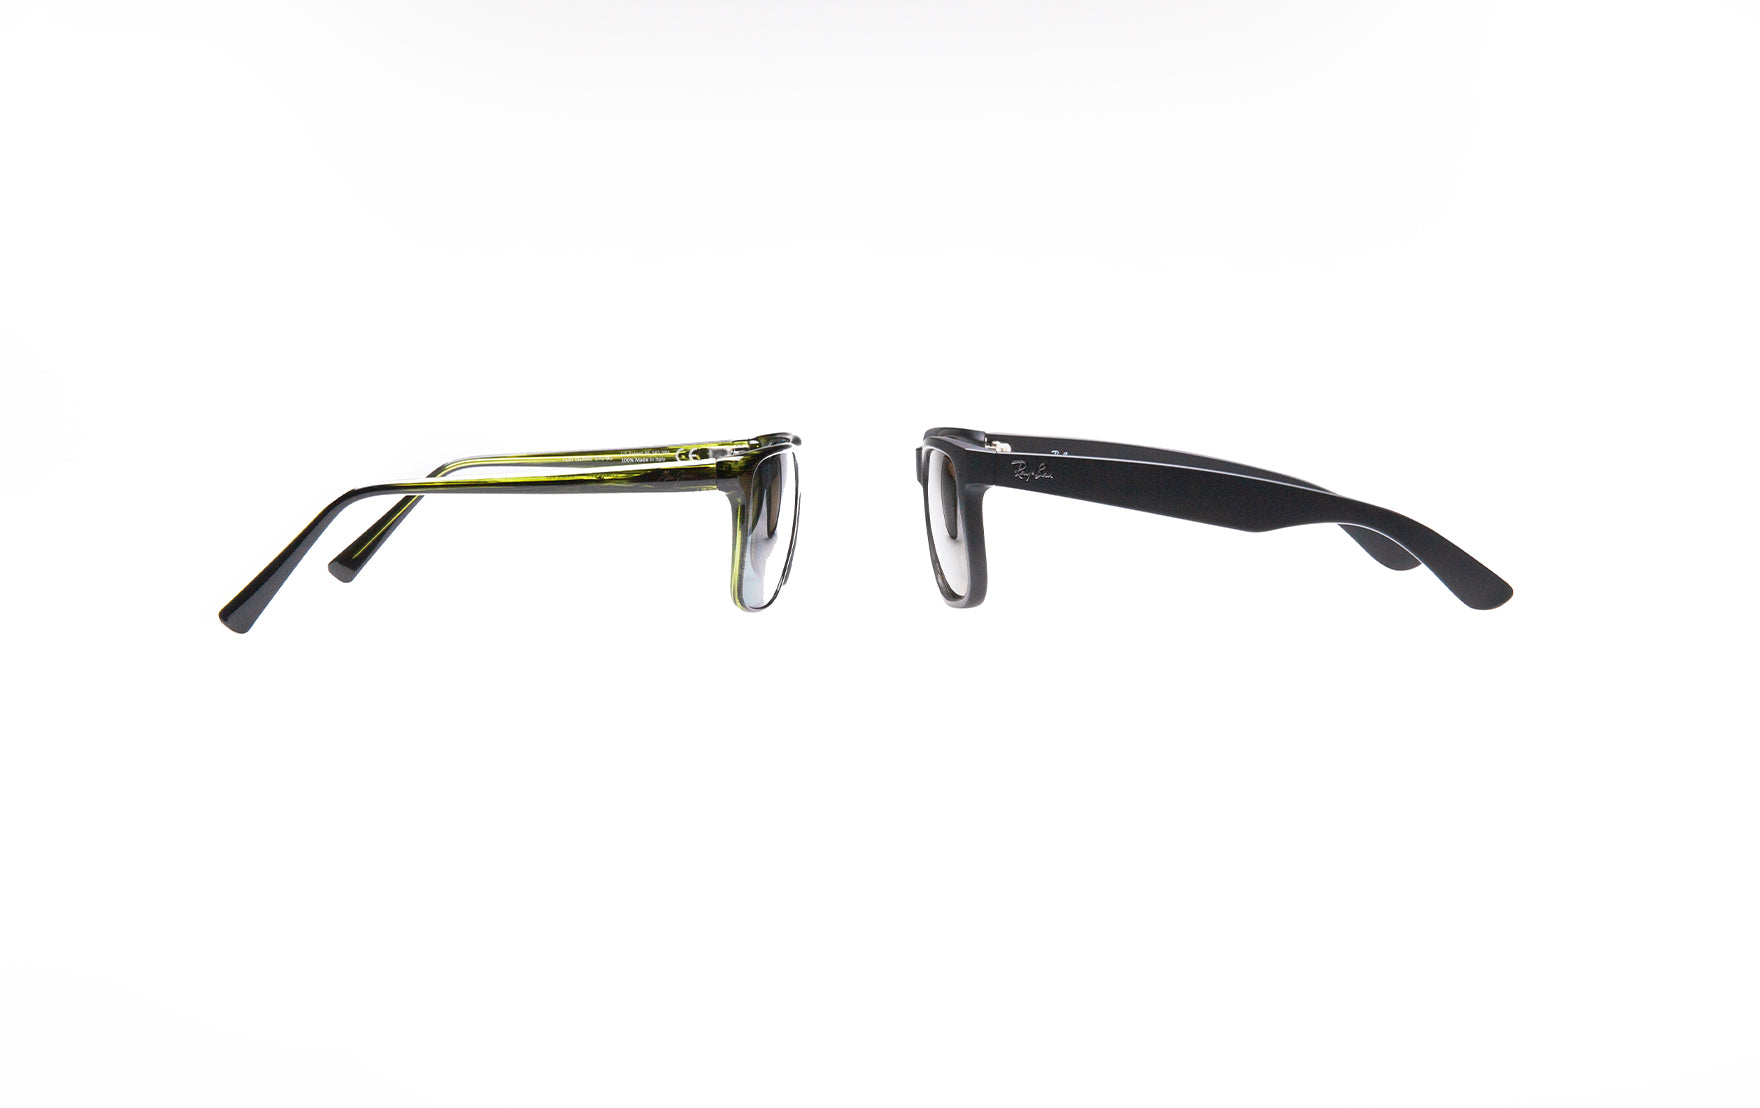 Maui Jim vs Ray Ban: Which is Right For You?